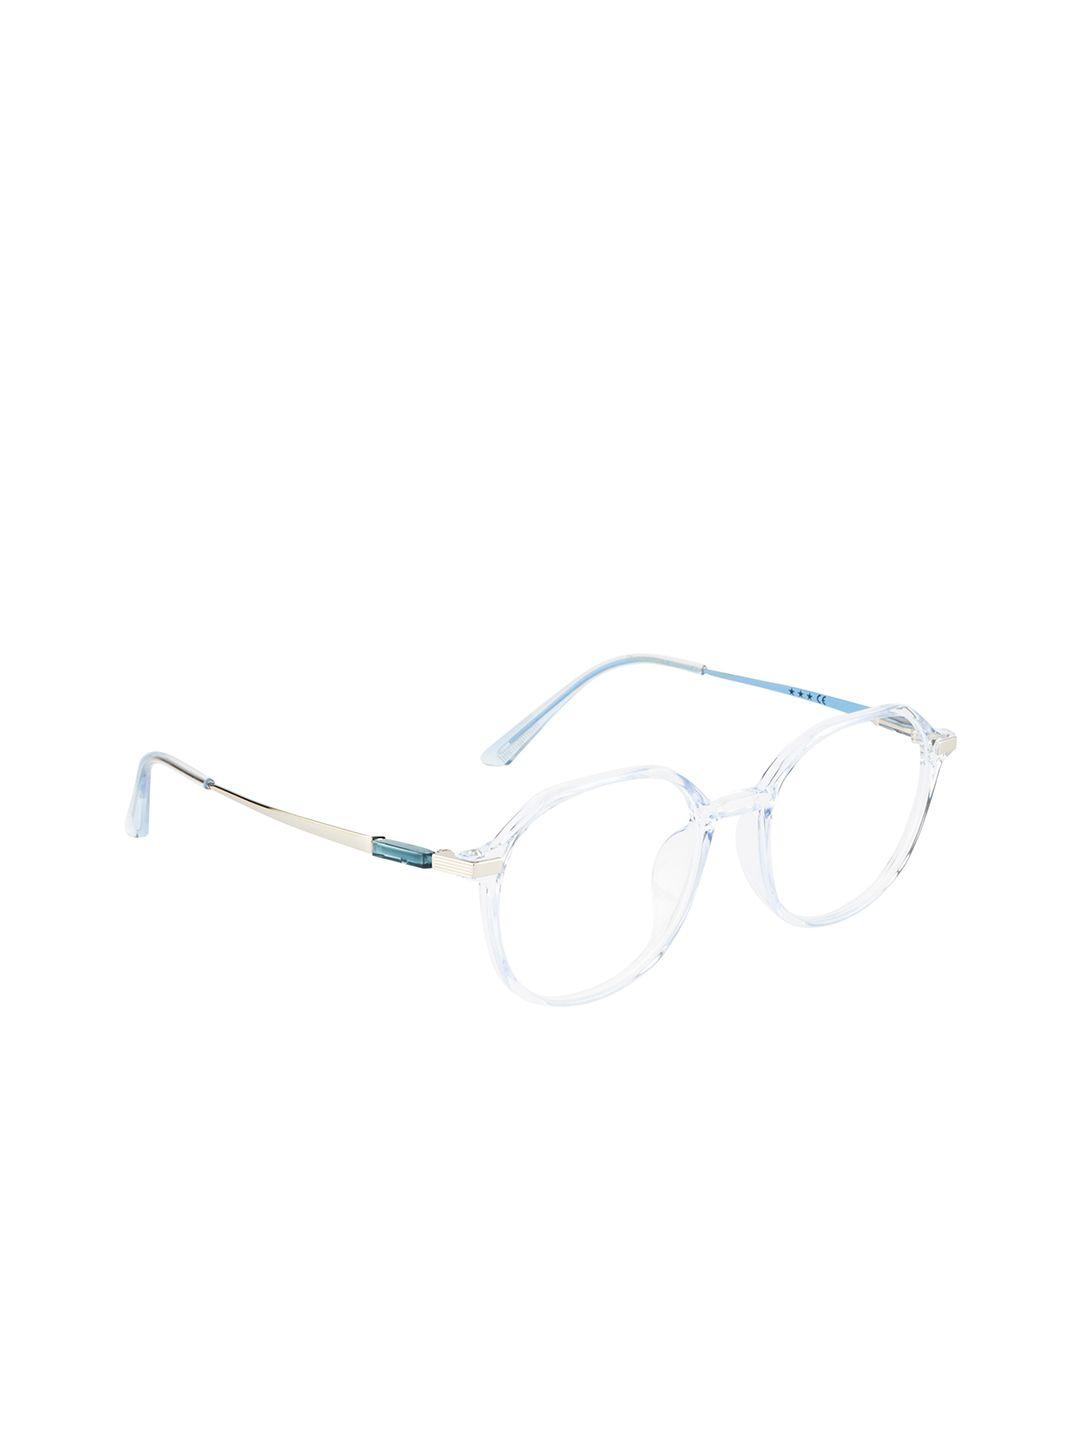 ted smith unisex blue & silver-toned full rim oval frames